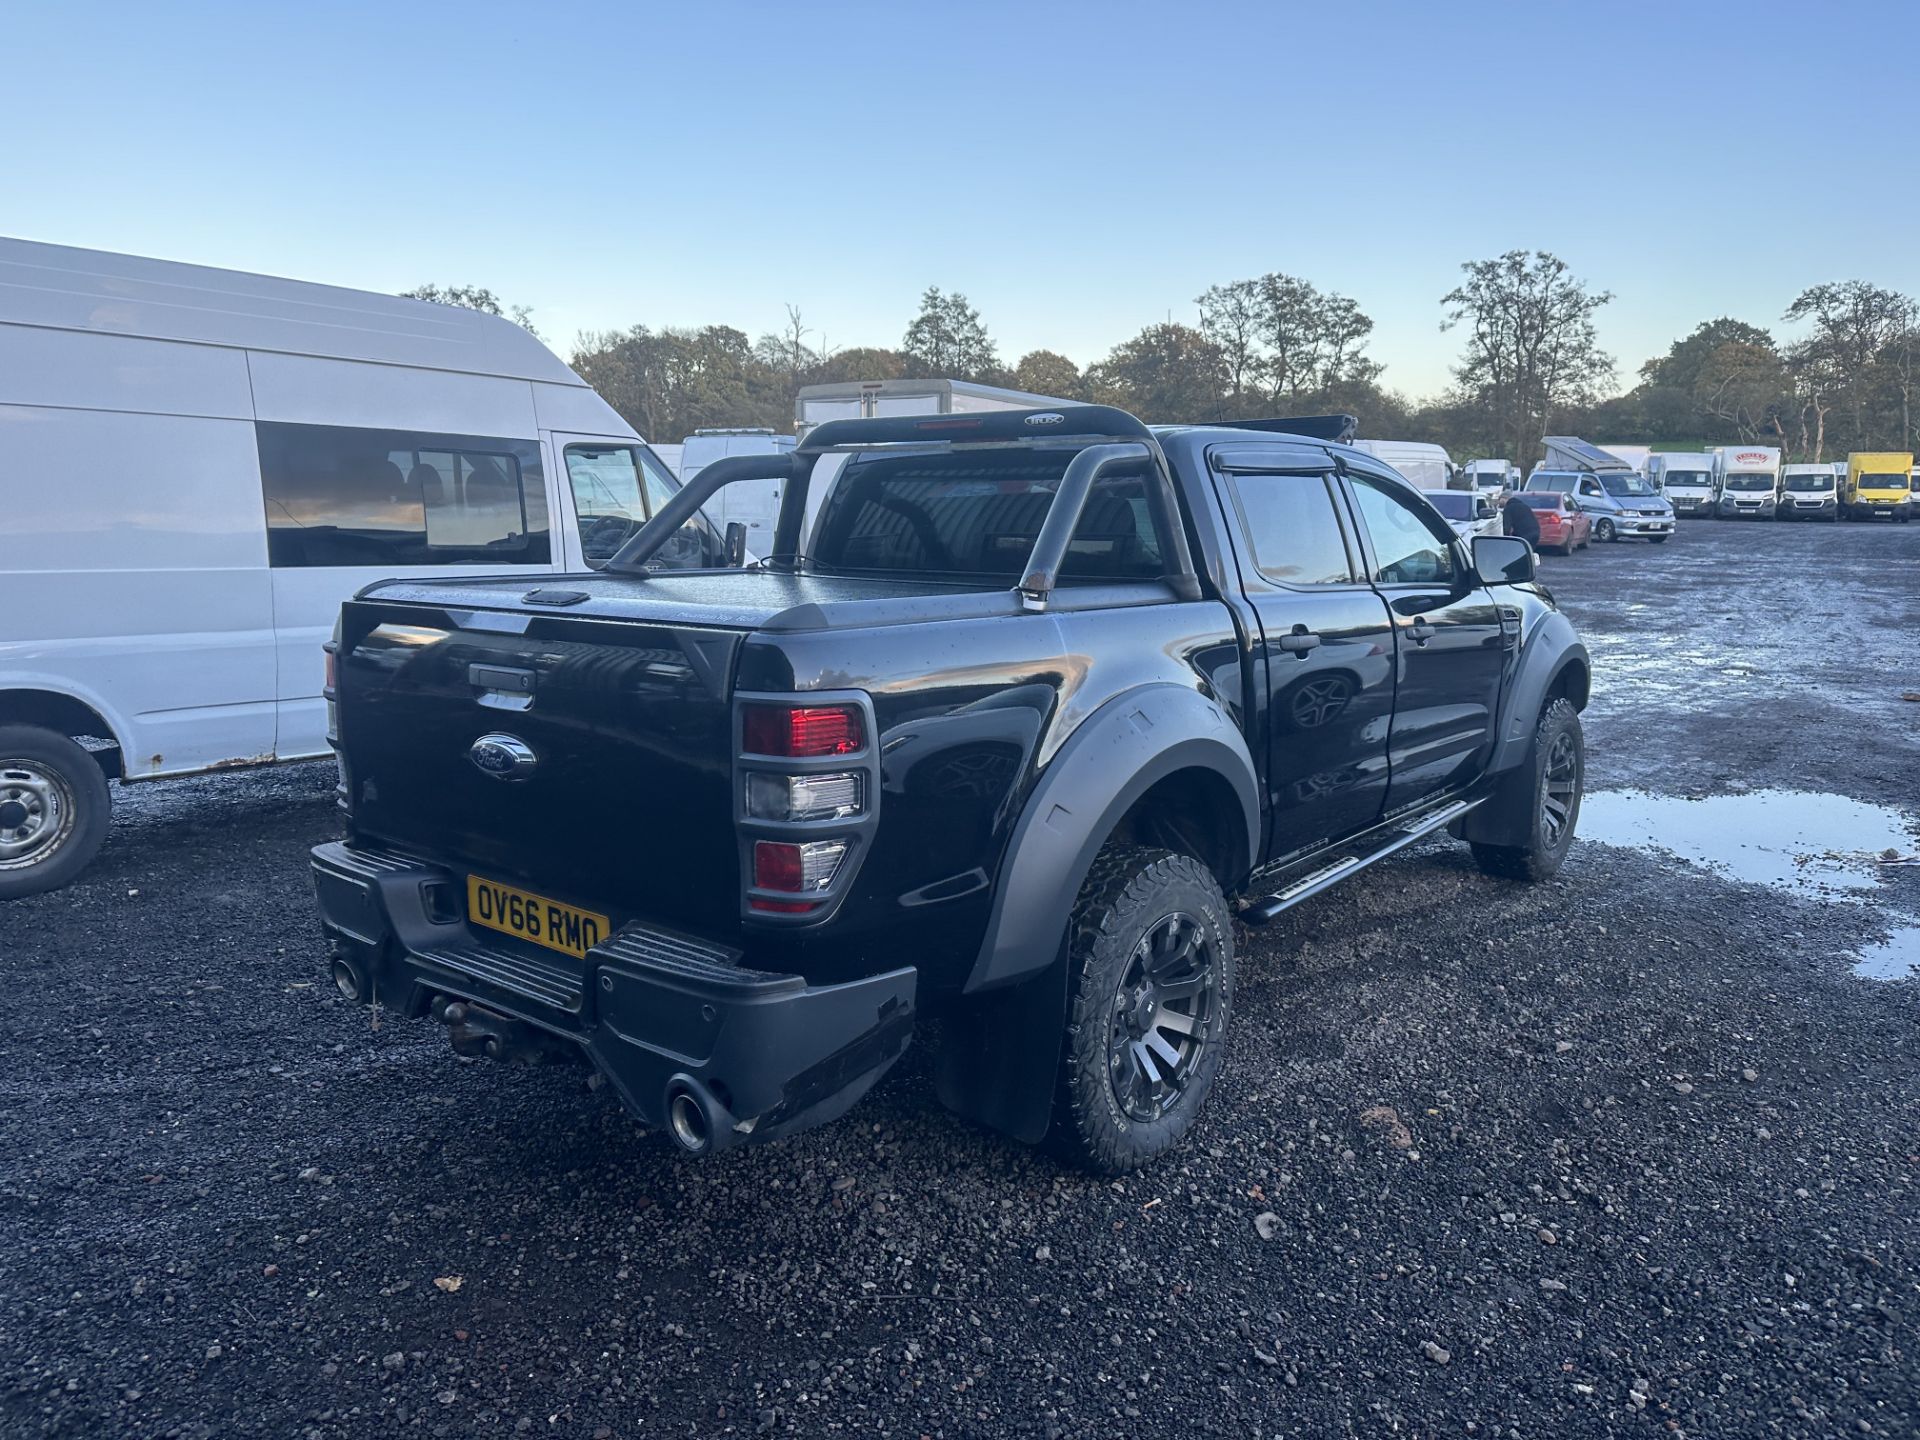 OV66RMO Model: 66 PLATE FORD RANGER LIMITED MSRT 4X4 3.2 TDCI AUTOMATIC - Image 19 of 23